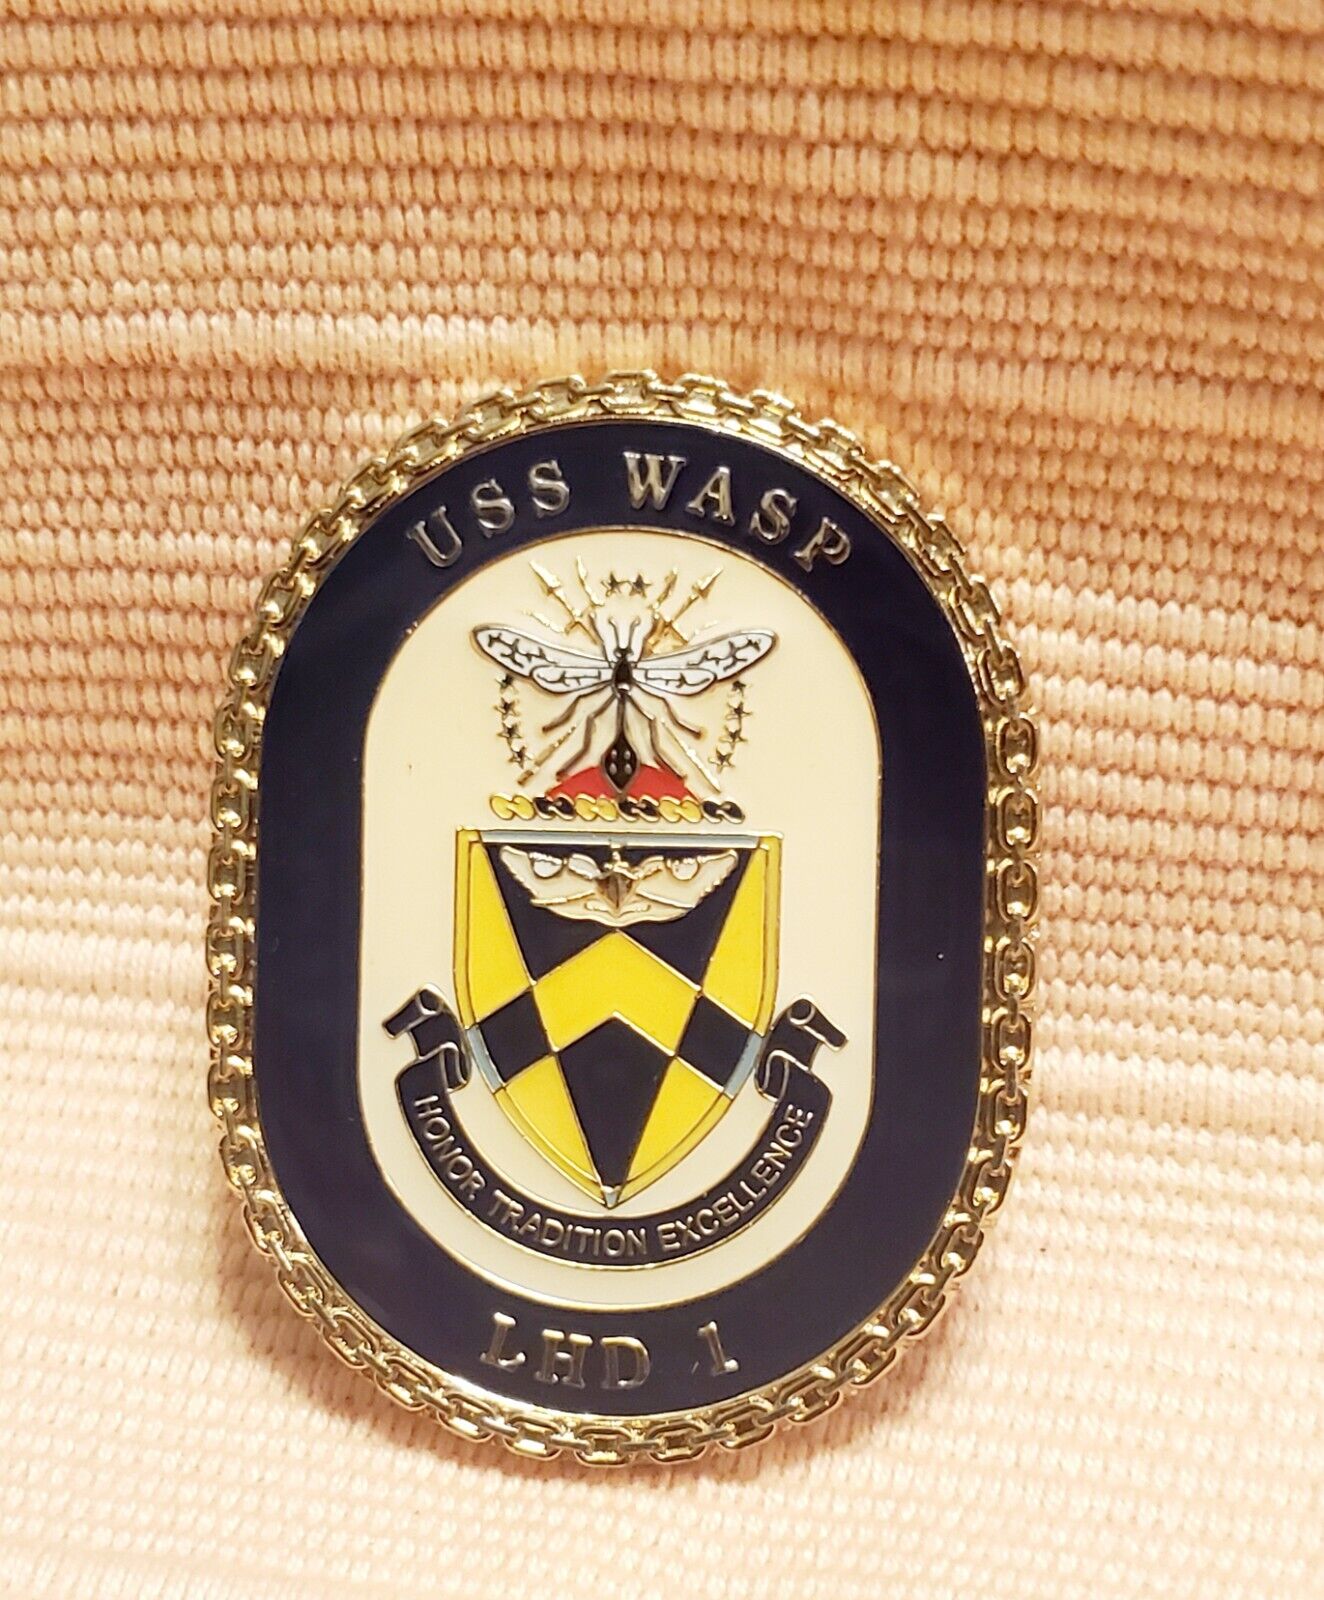 LHD-1 USS WASP AMPHIB USN US NAVY CHIEF CPO Military Challenge Coin